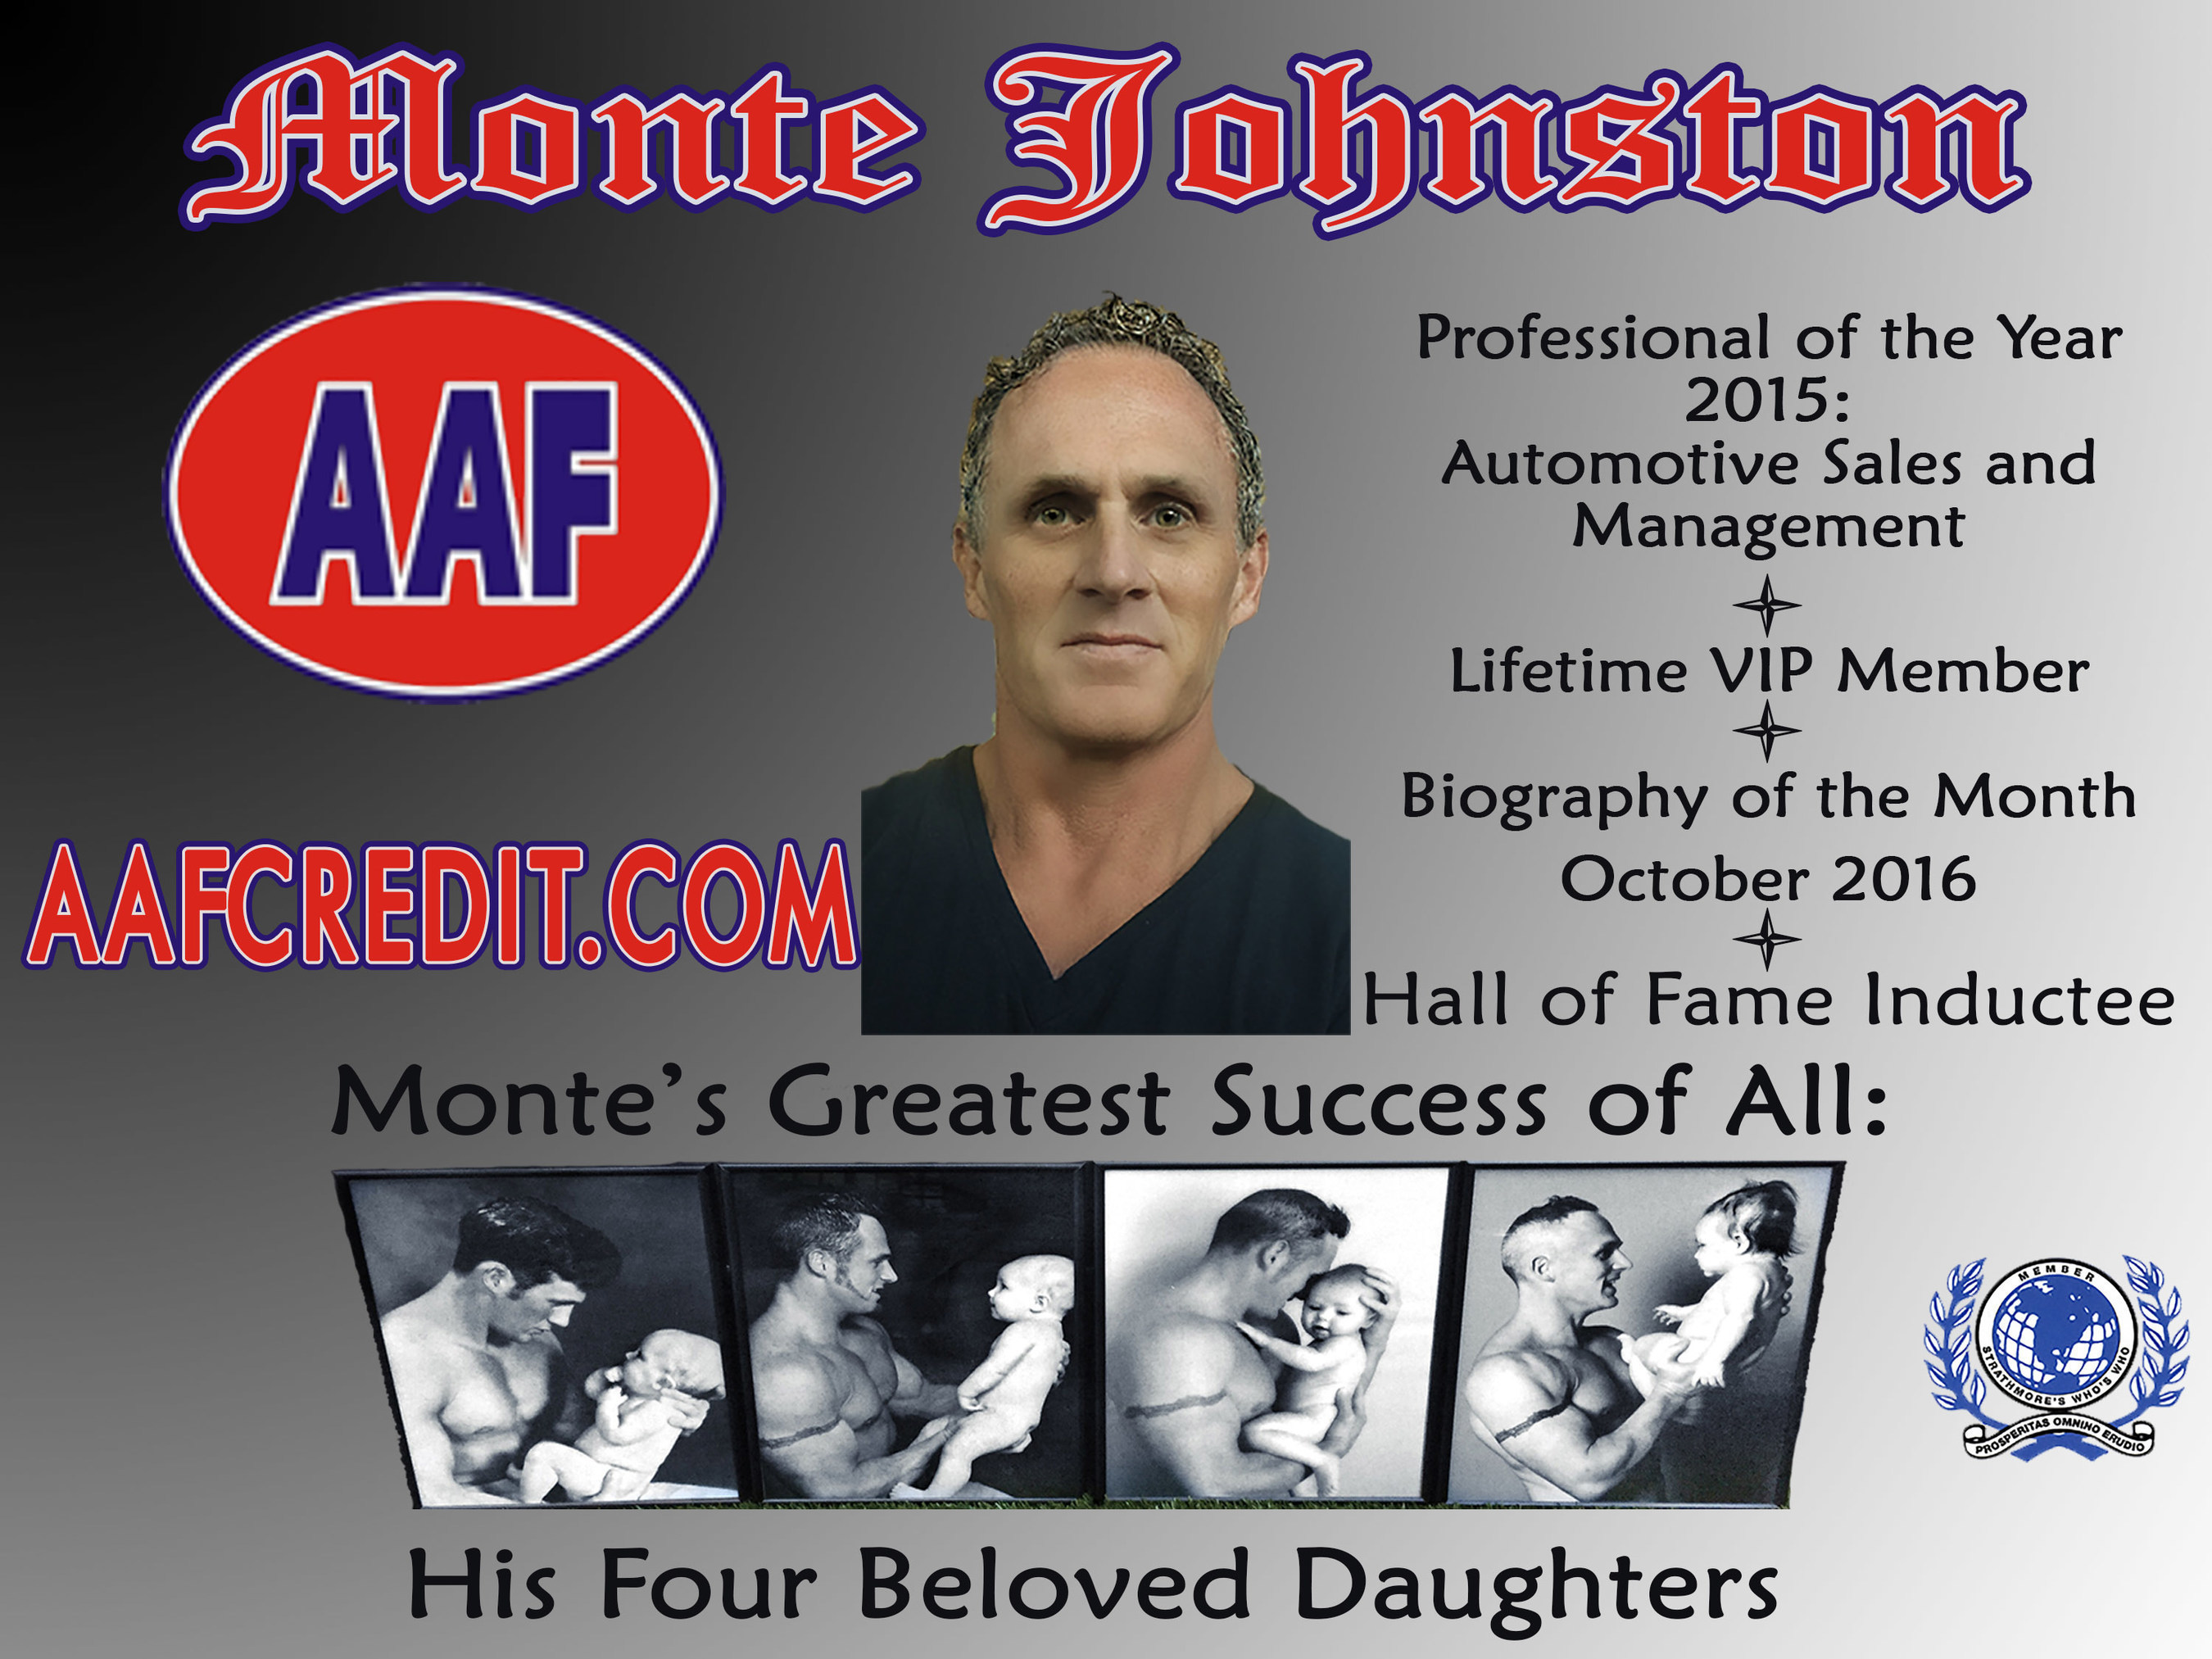 Monte Johnston Inducted Into the Strathmore's Who's Who Hall of Fame. Visit: www.affcredit.com